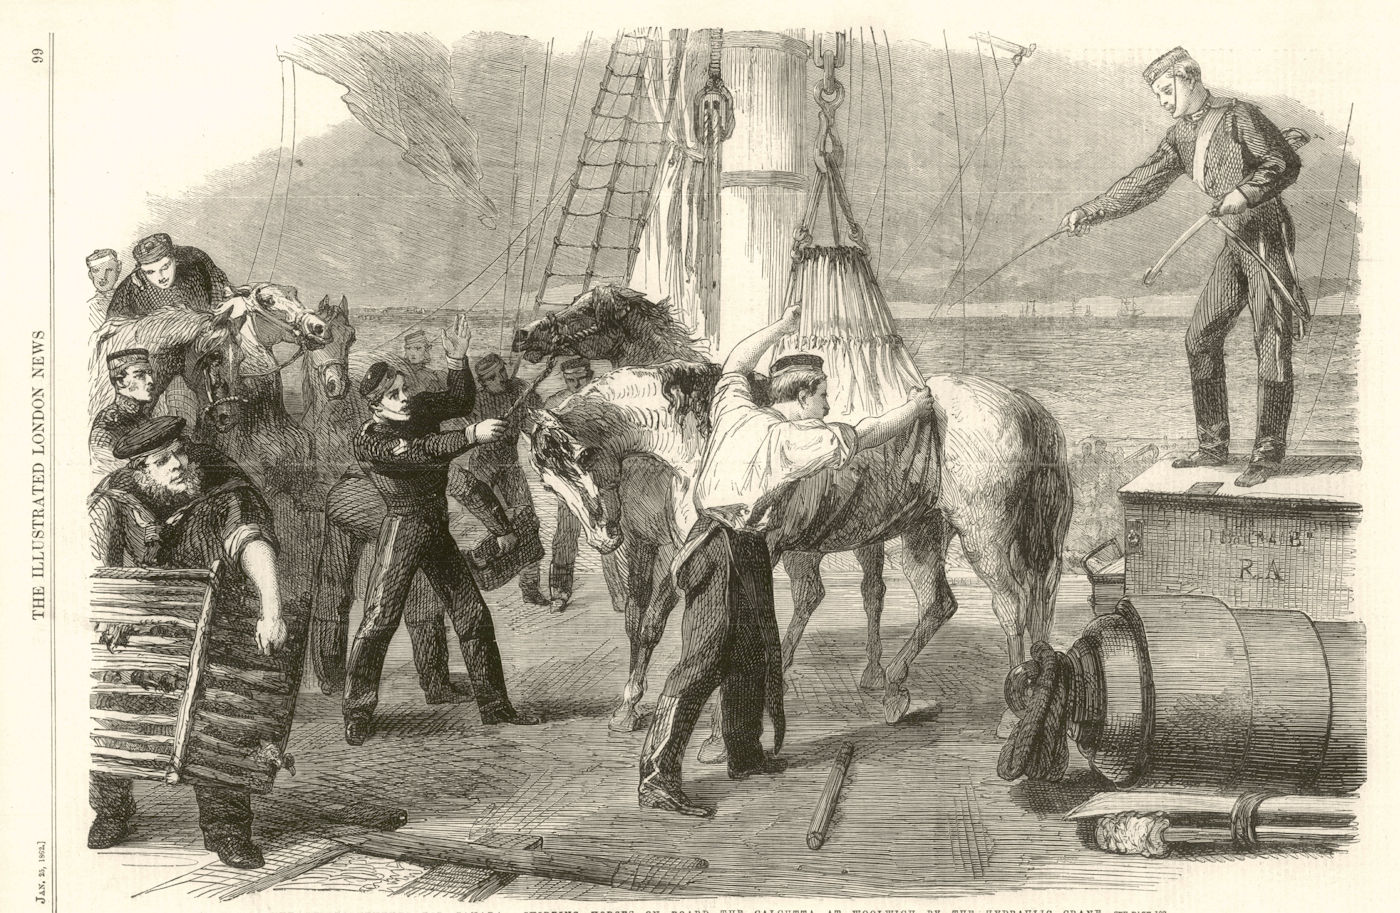 Associate Product Canada reinforcements: Shipping horses Woolwich hydraulic crane. London 1862